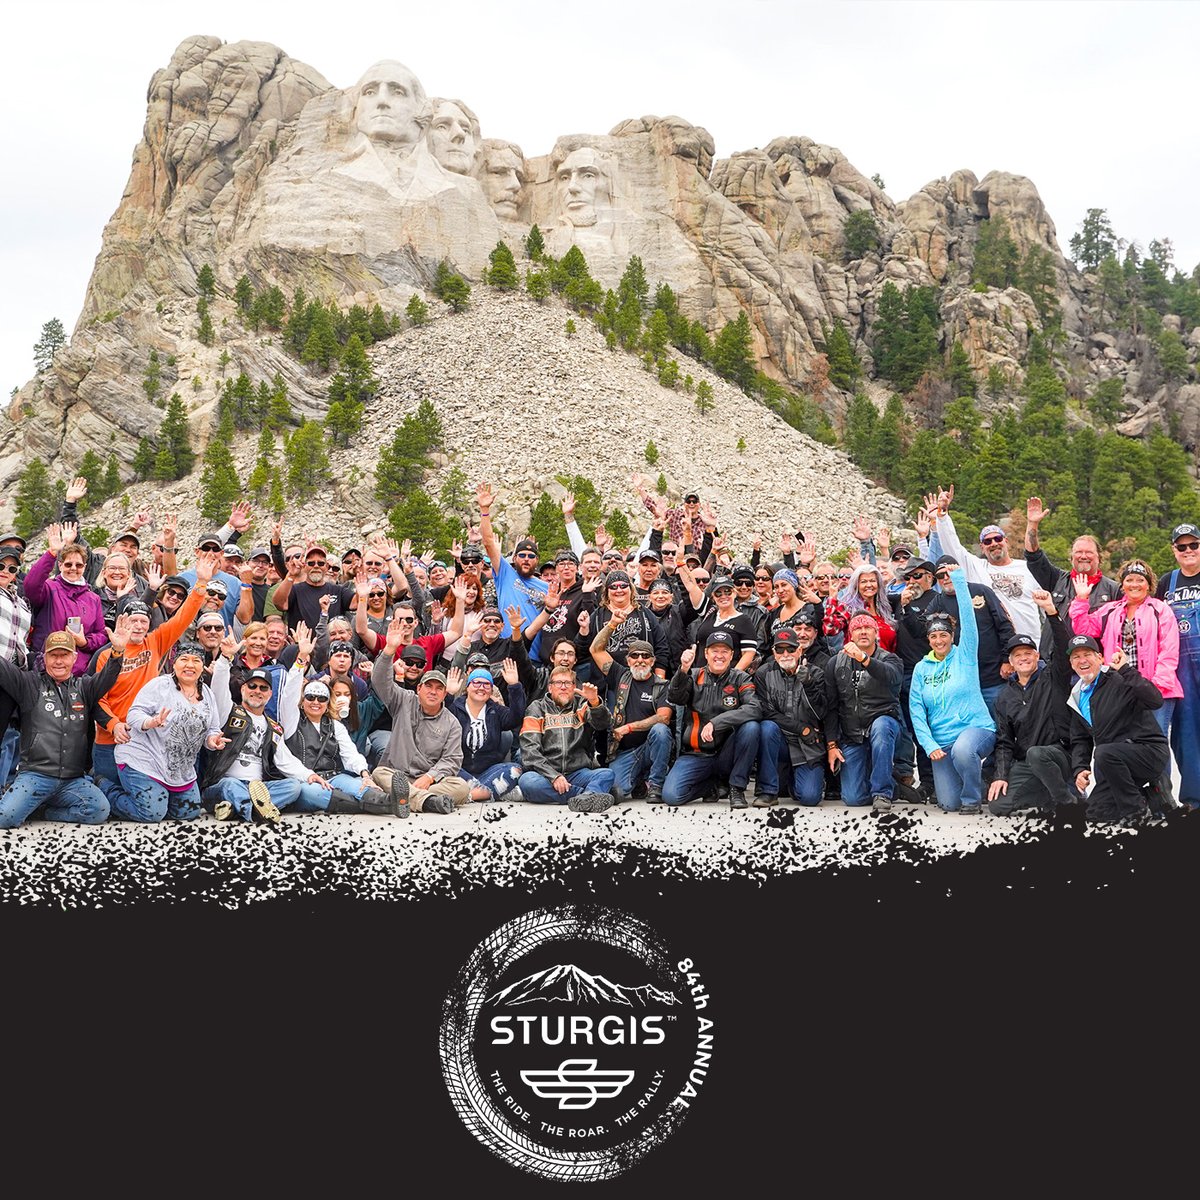 Mount Rushmore has always been a popular stop for riders - #sturgis #sturgisrally